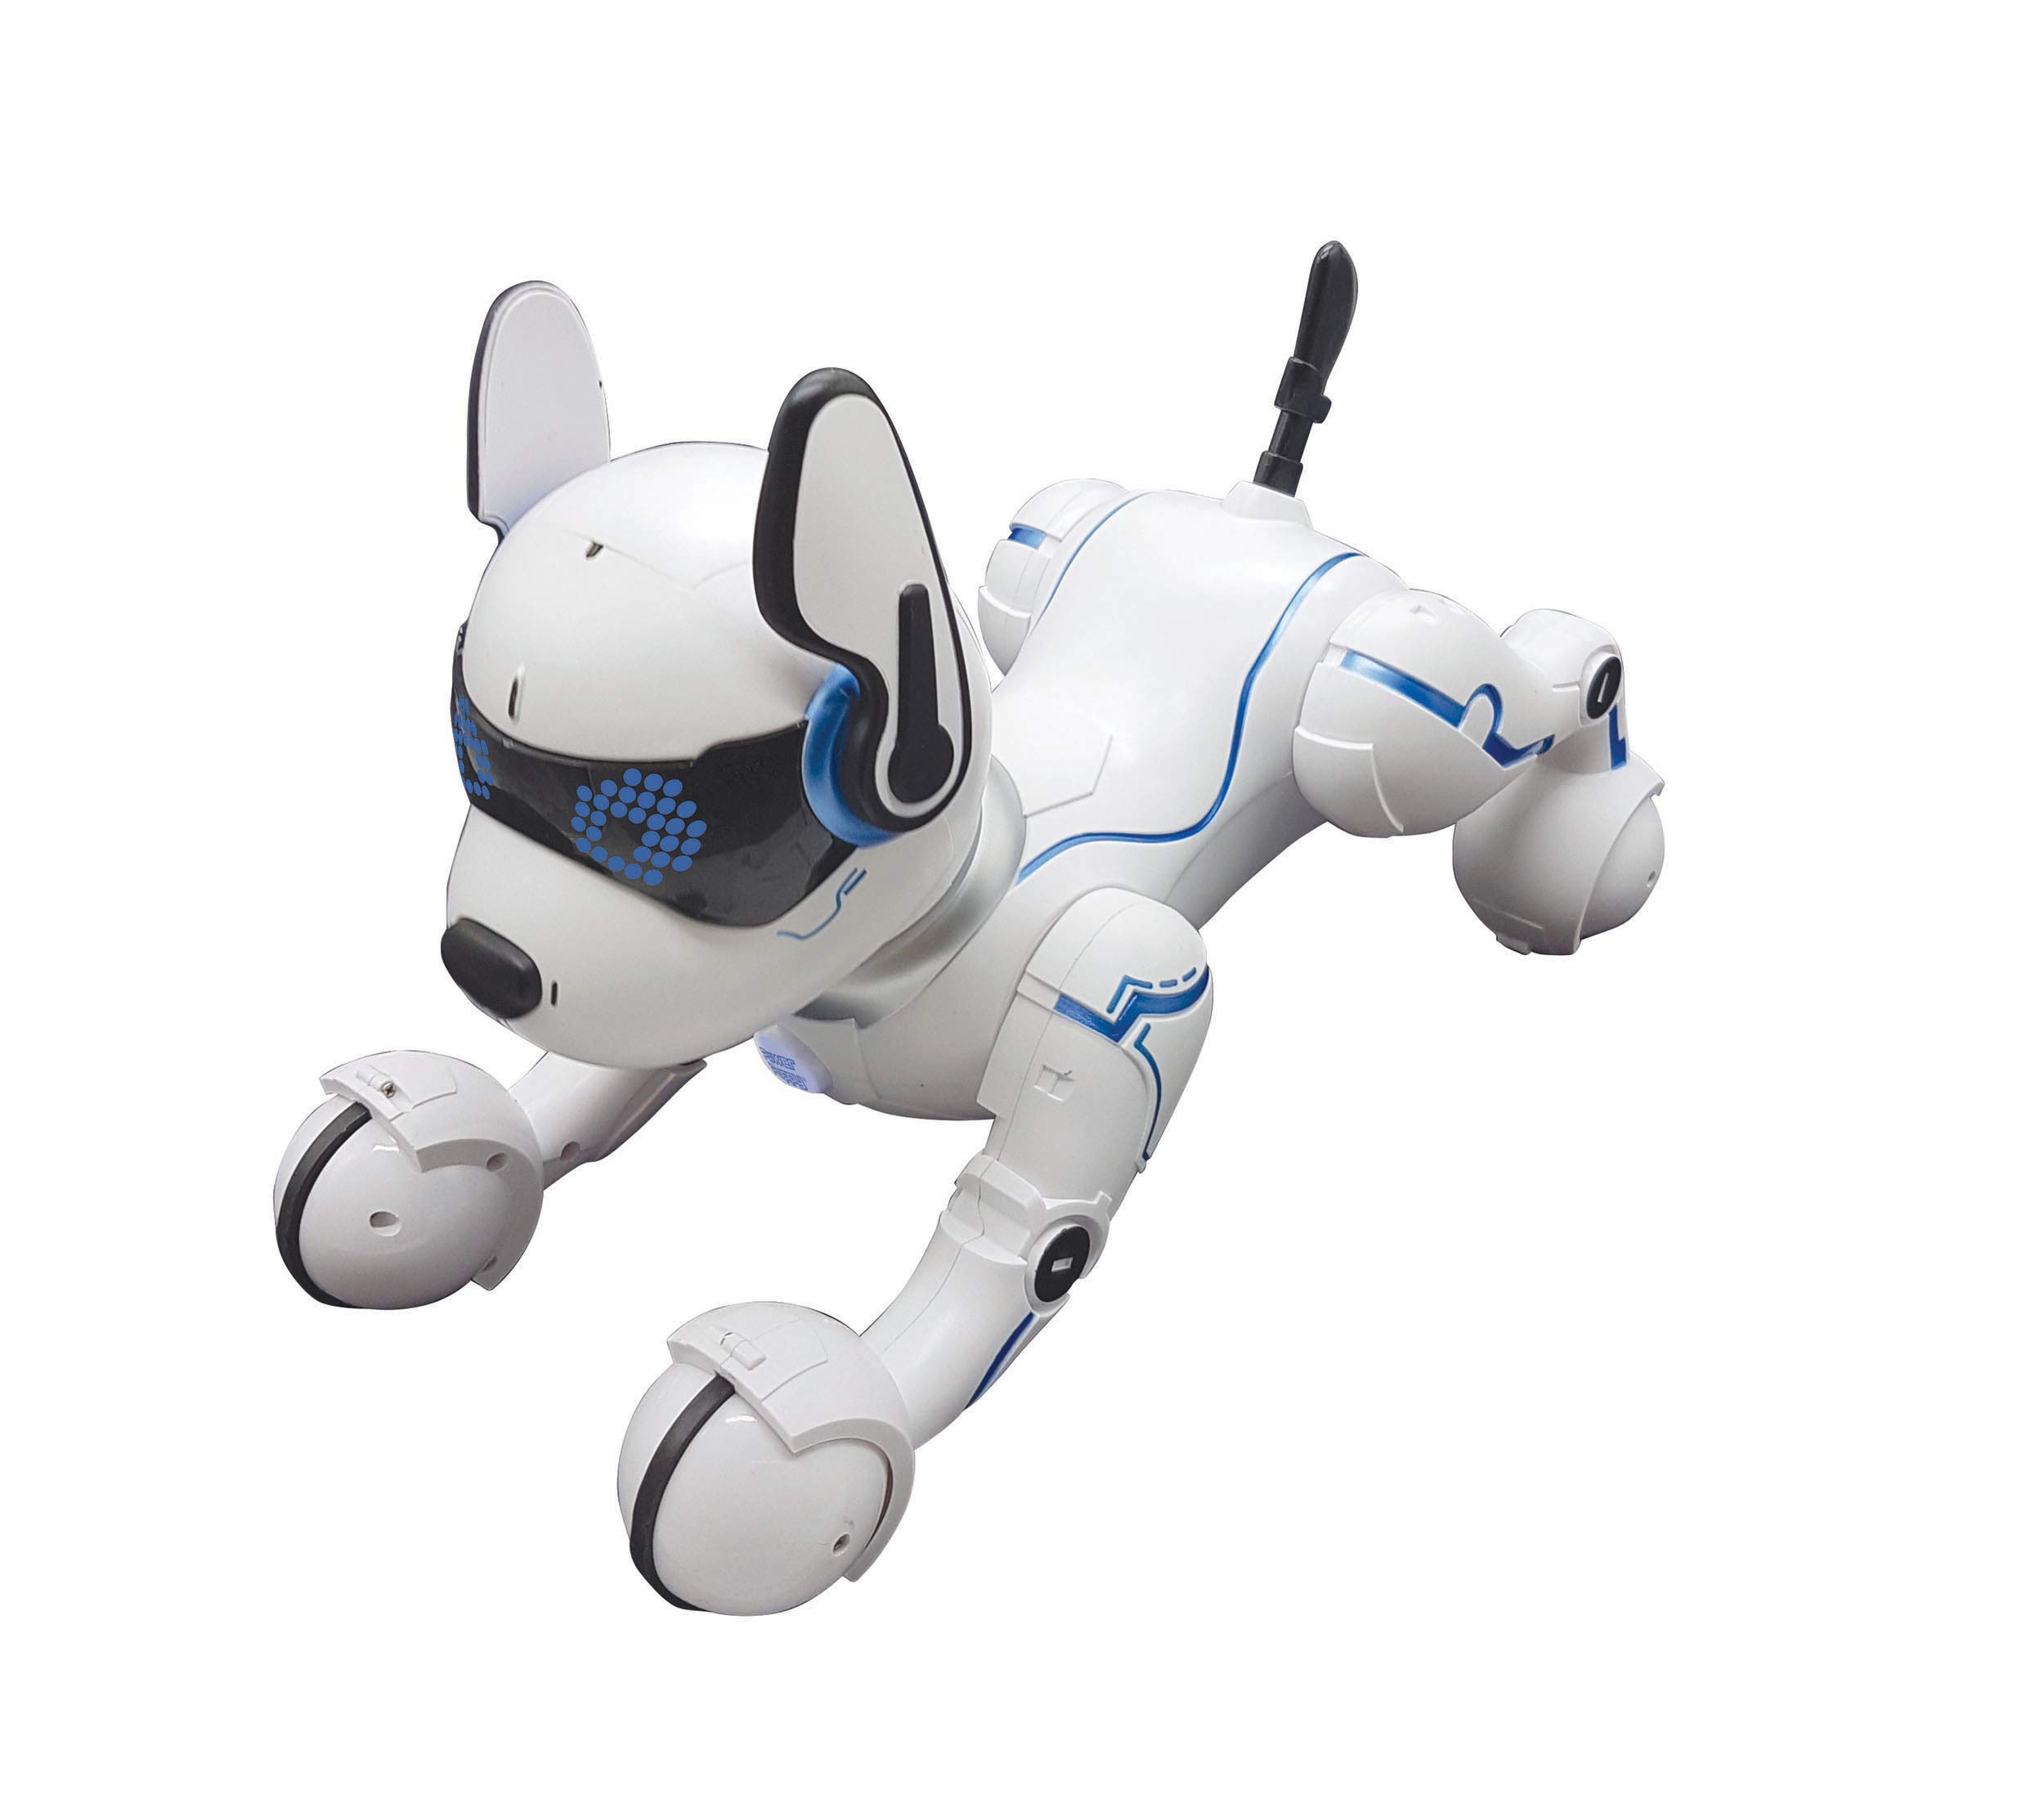 LEXiBOOK Power Puppy - My Smart Dog Robot to Train - Programmable Robot with Remote Control, Training and Gesture Control Function, Dance, Music, Light Effects, Toy for Children - DOG01